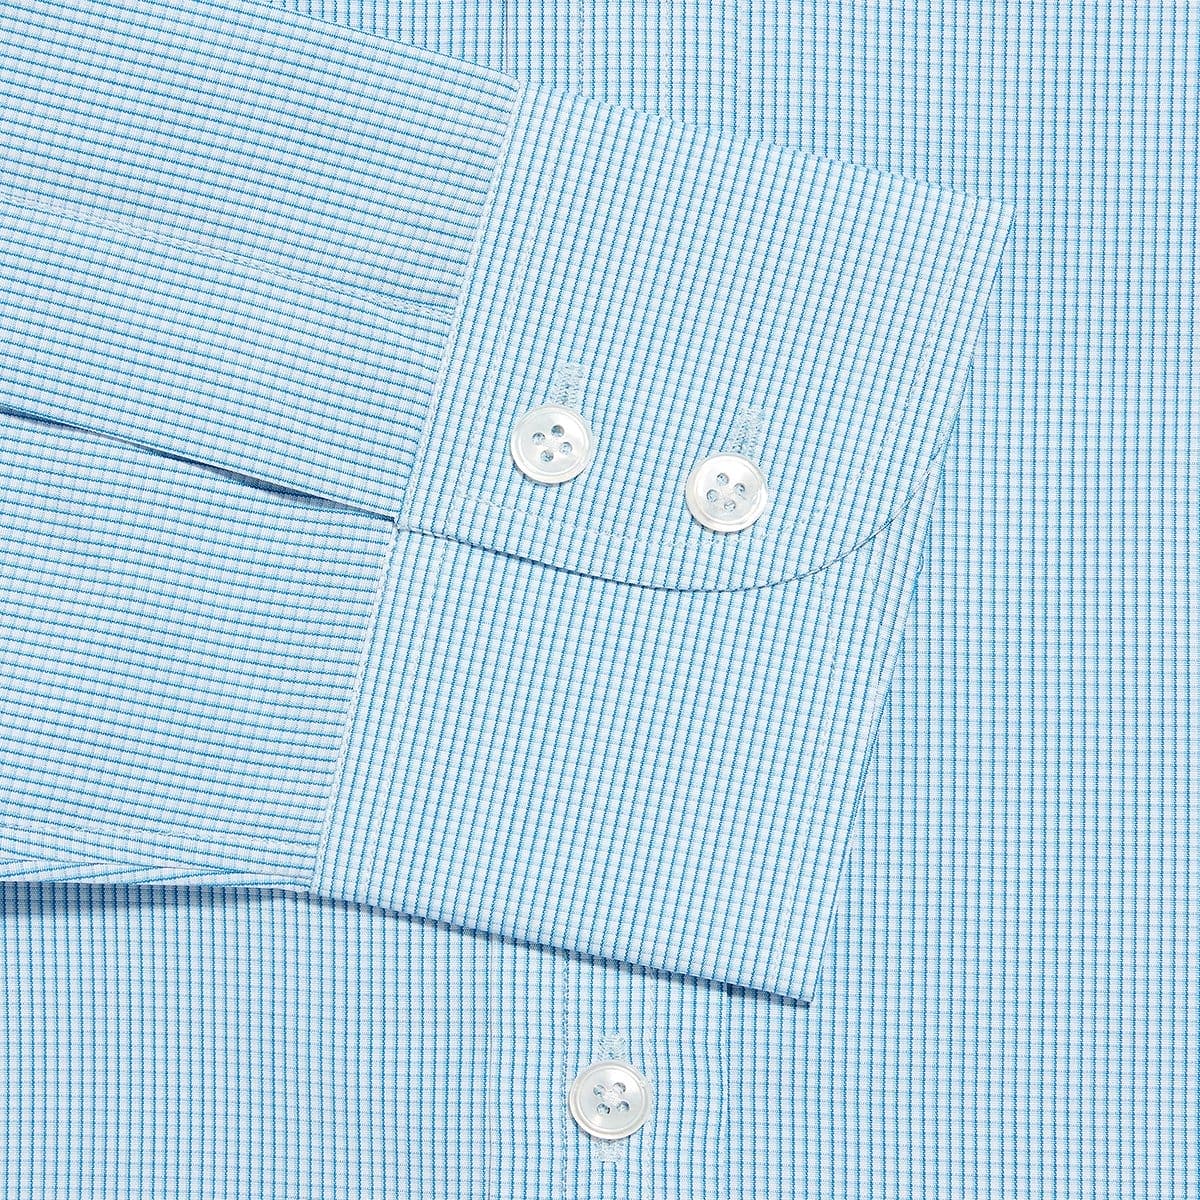 Contemporary Fit, Cut-away Collar, 2 Button Cuff Shirt in a Turquoise, Navy & White Check Poplin Cotton